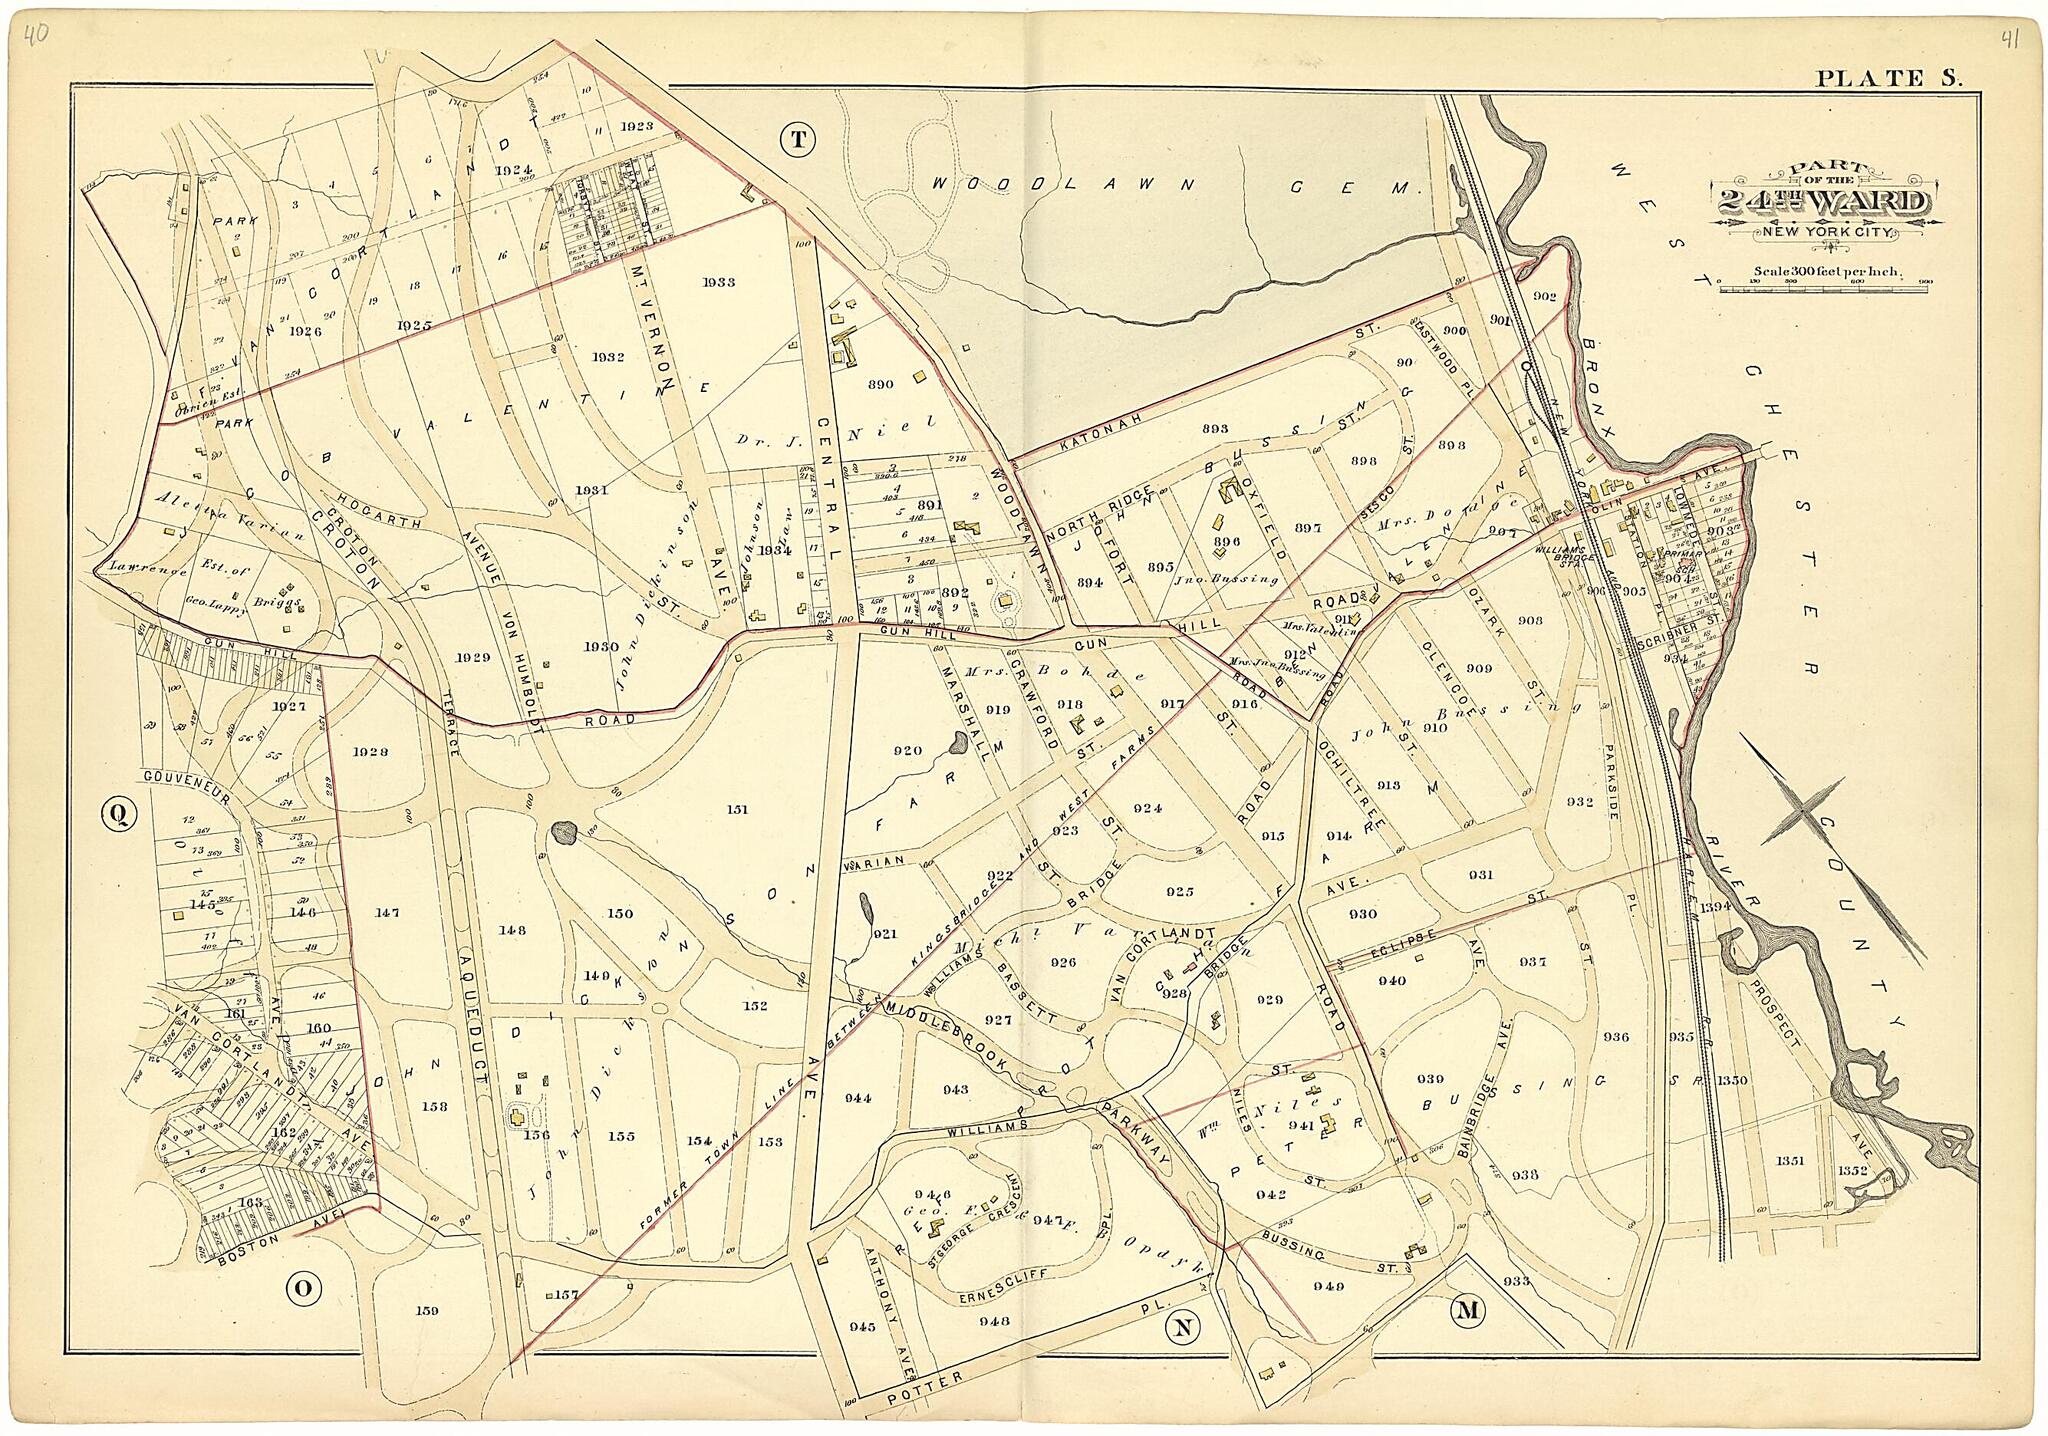 This old map of Part of the 24th Ward New York City - Plate S from Atlas of the Twenty Fourth Ward, New York City from 1882 was created by A. H. (August H.) Mueller in 1882